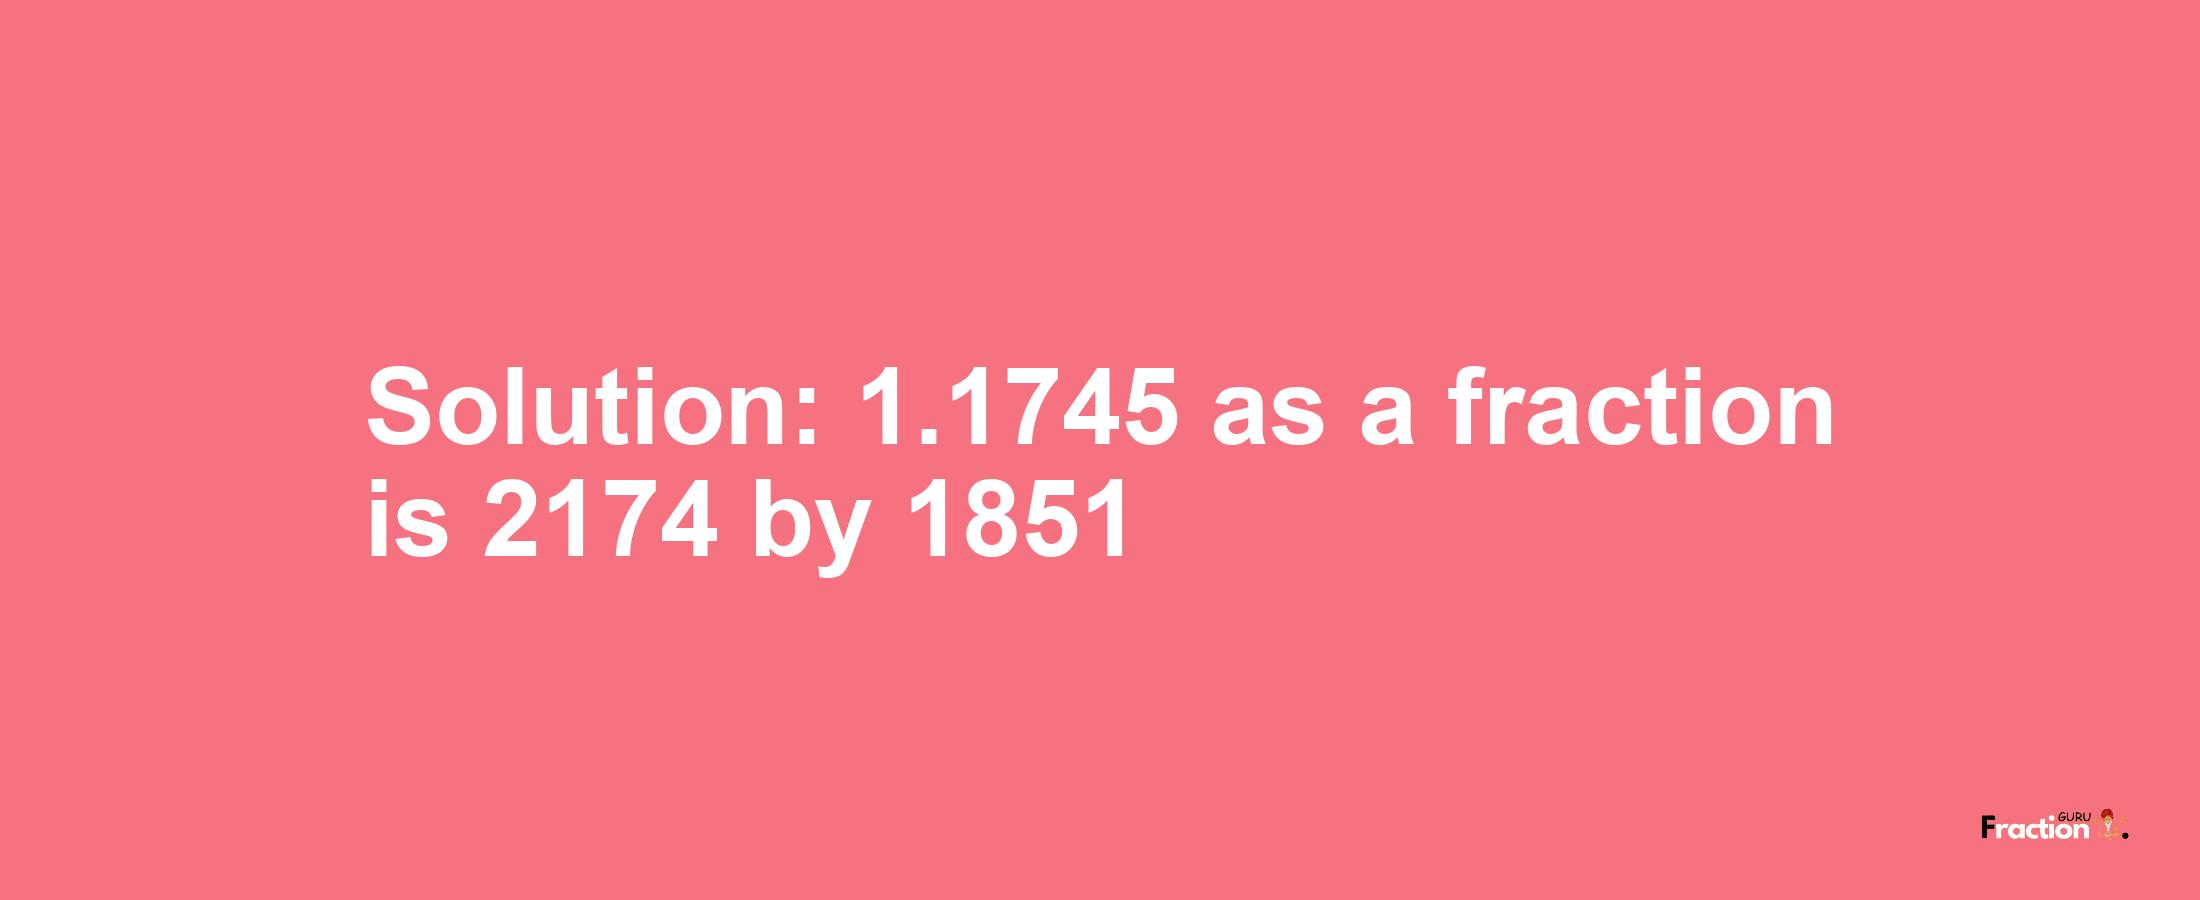 Solution:1.1745 as a fraction is 2174/1851